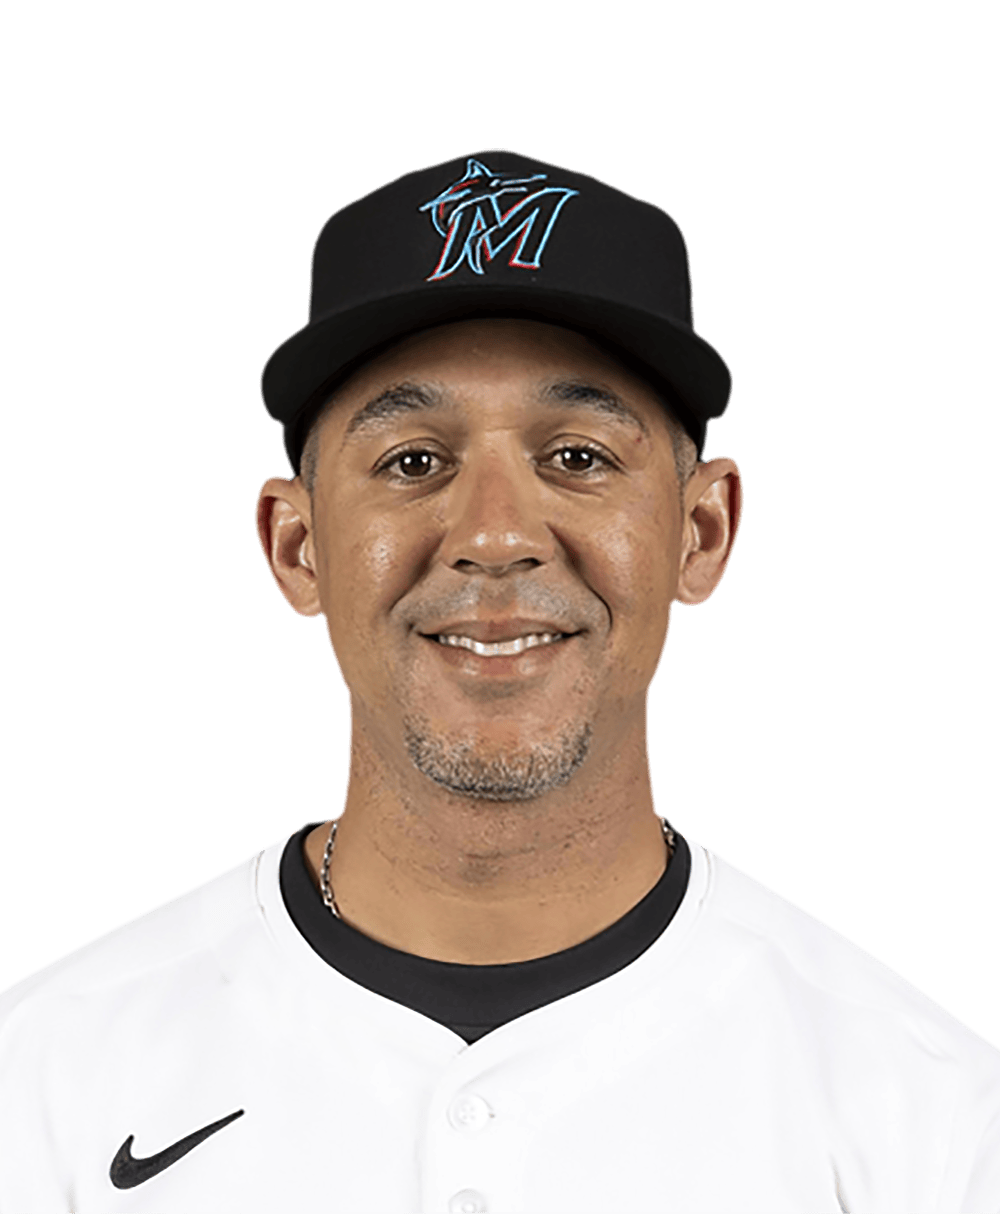 Ex-Miami Hurricane outfielder Jon Jay and St. Louis Cardinals